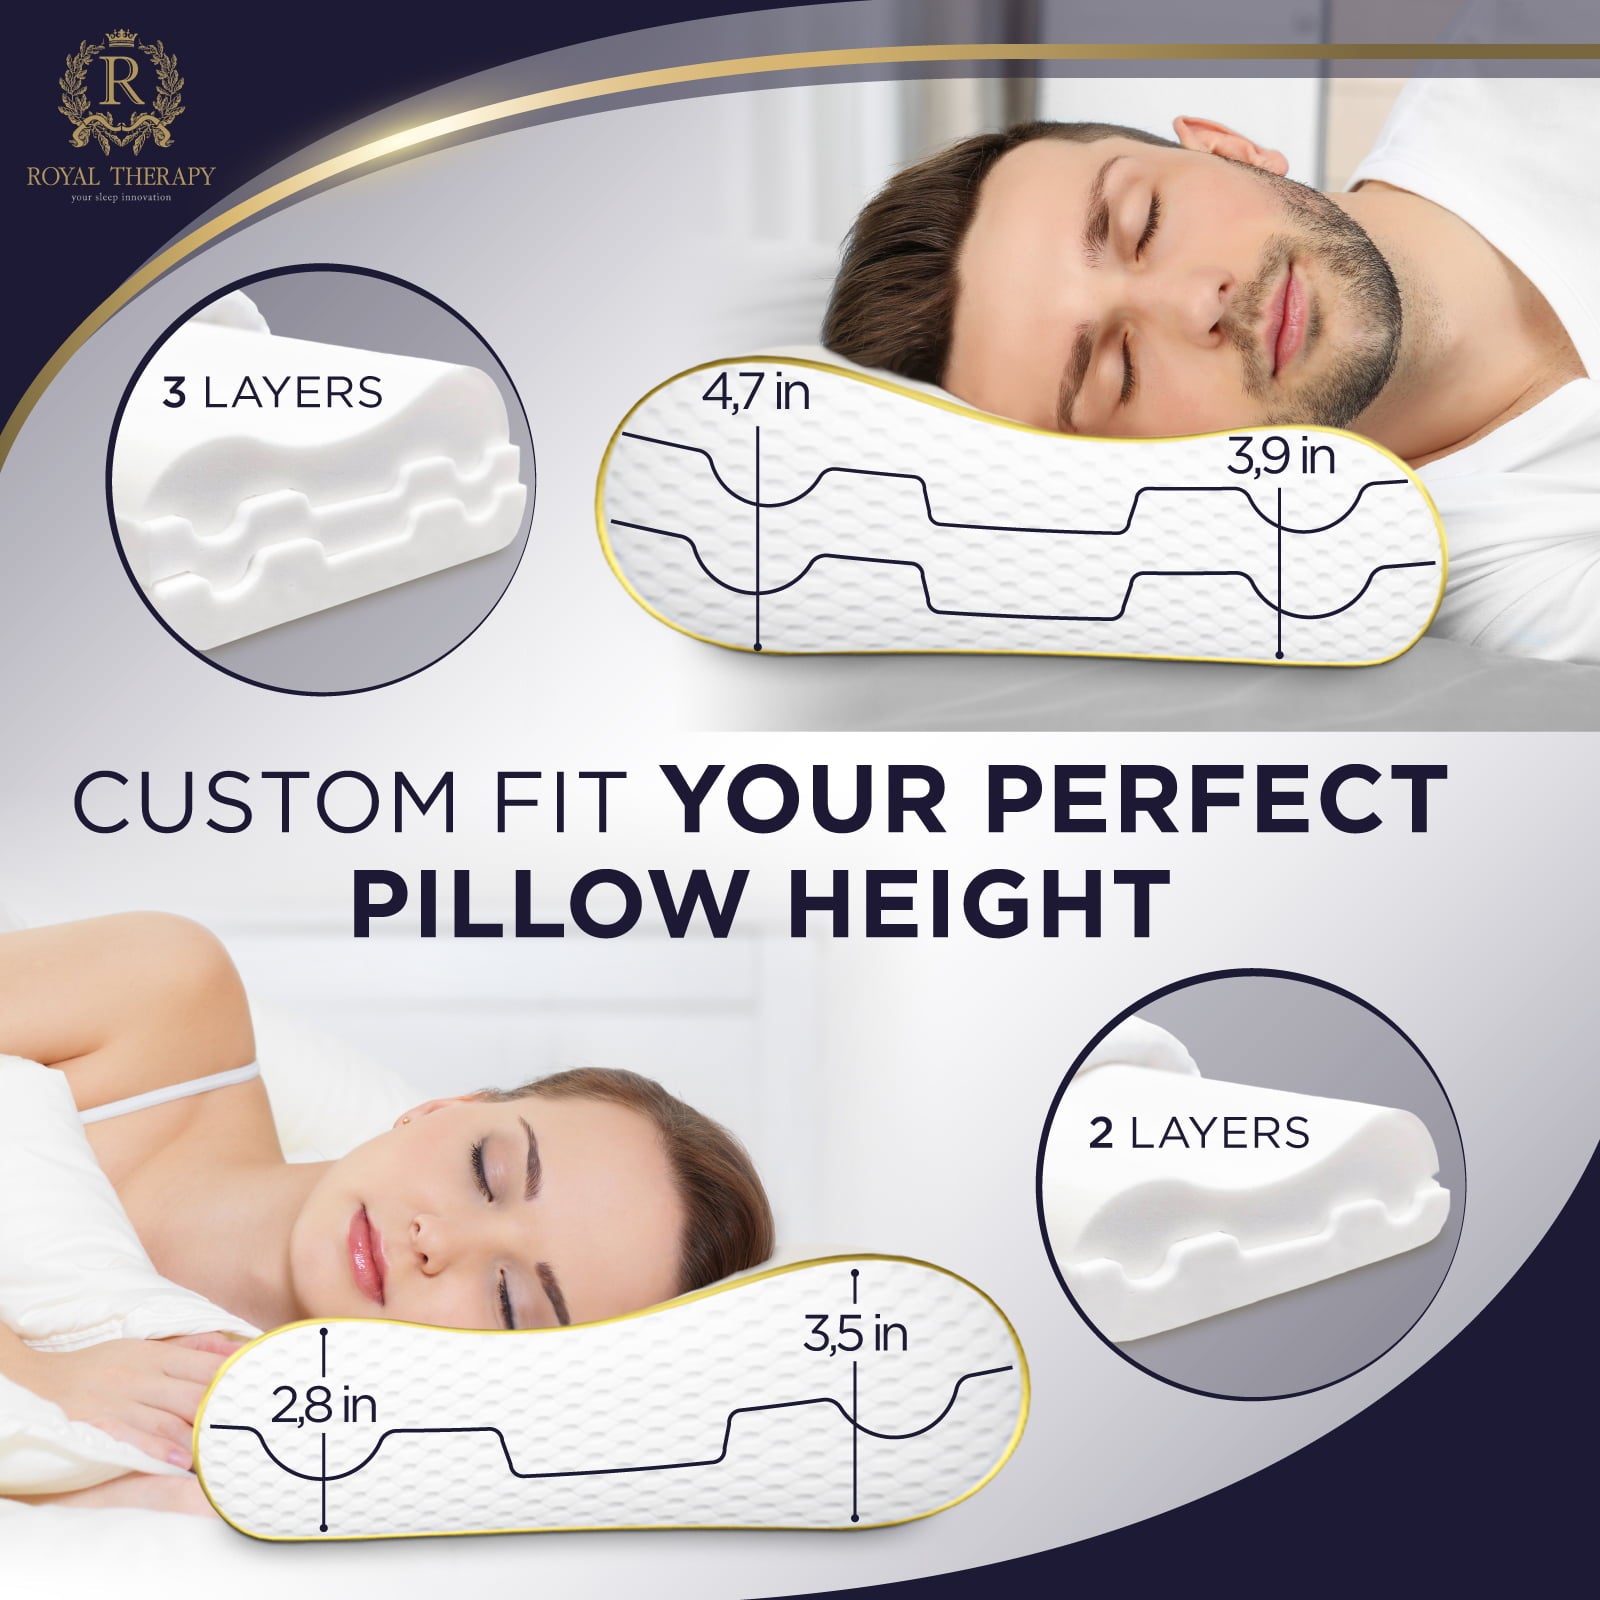 Royal Therapy King Memory Foam Pillow, Bed Pillow for Neck & Shoulder Support, Tempurpedic Contour Pillow